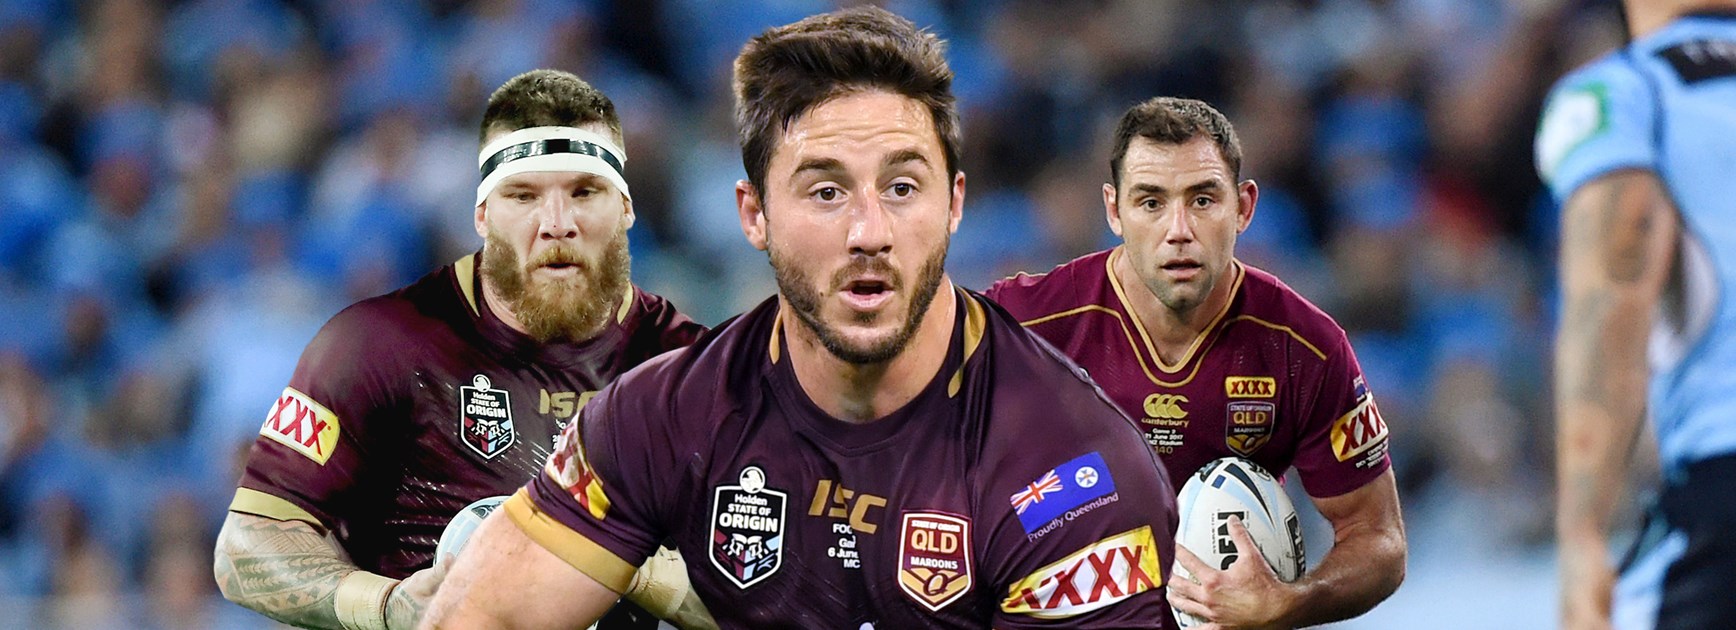 Maroons hooker: NRL.com experts have their say